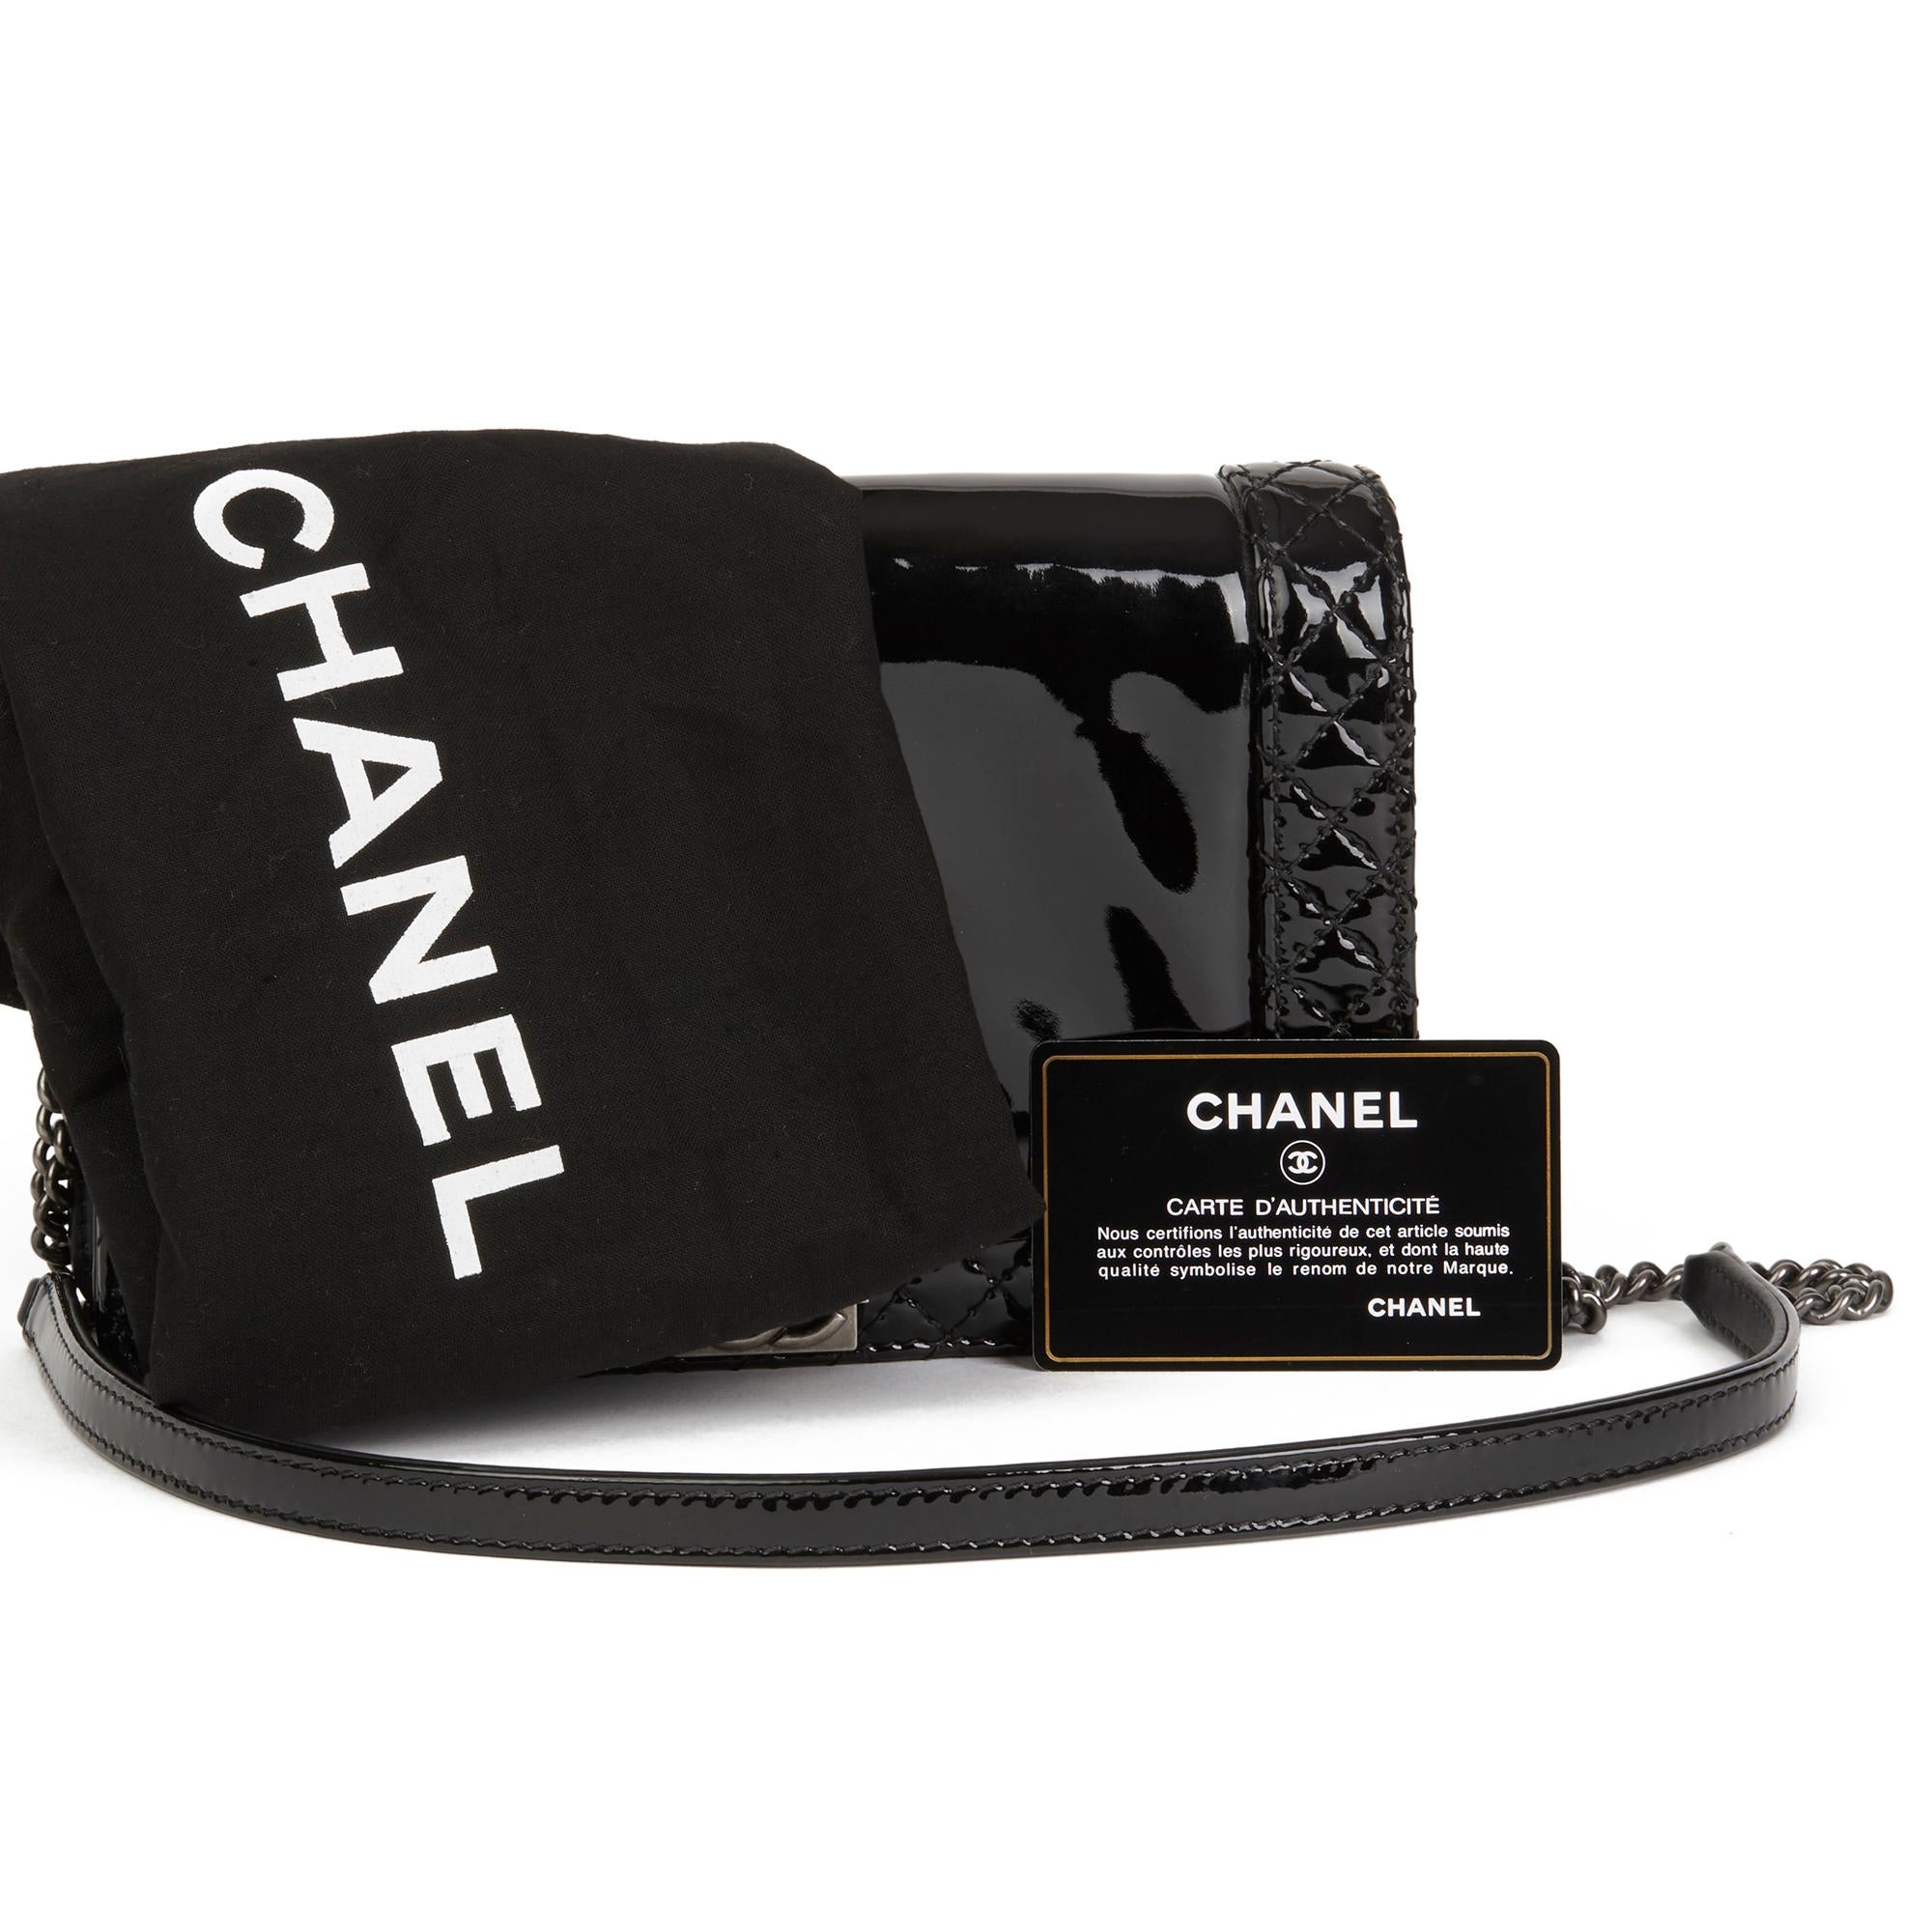 2013 Chanel Black Quilted Patent Leather Small Le Boy Reverso 7